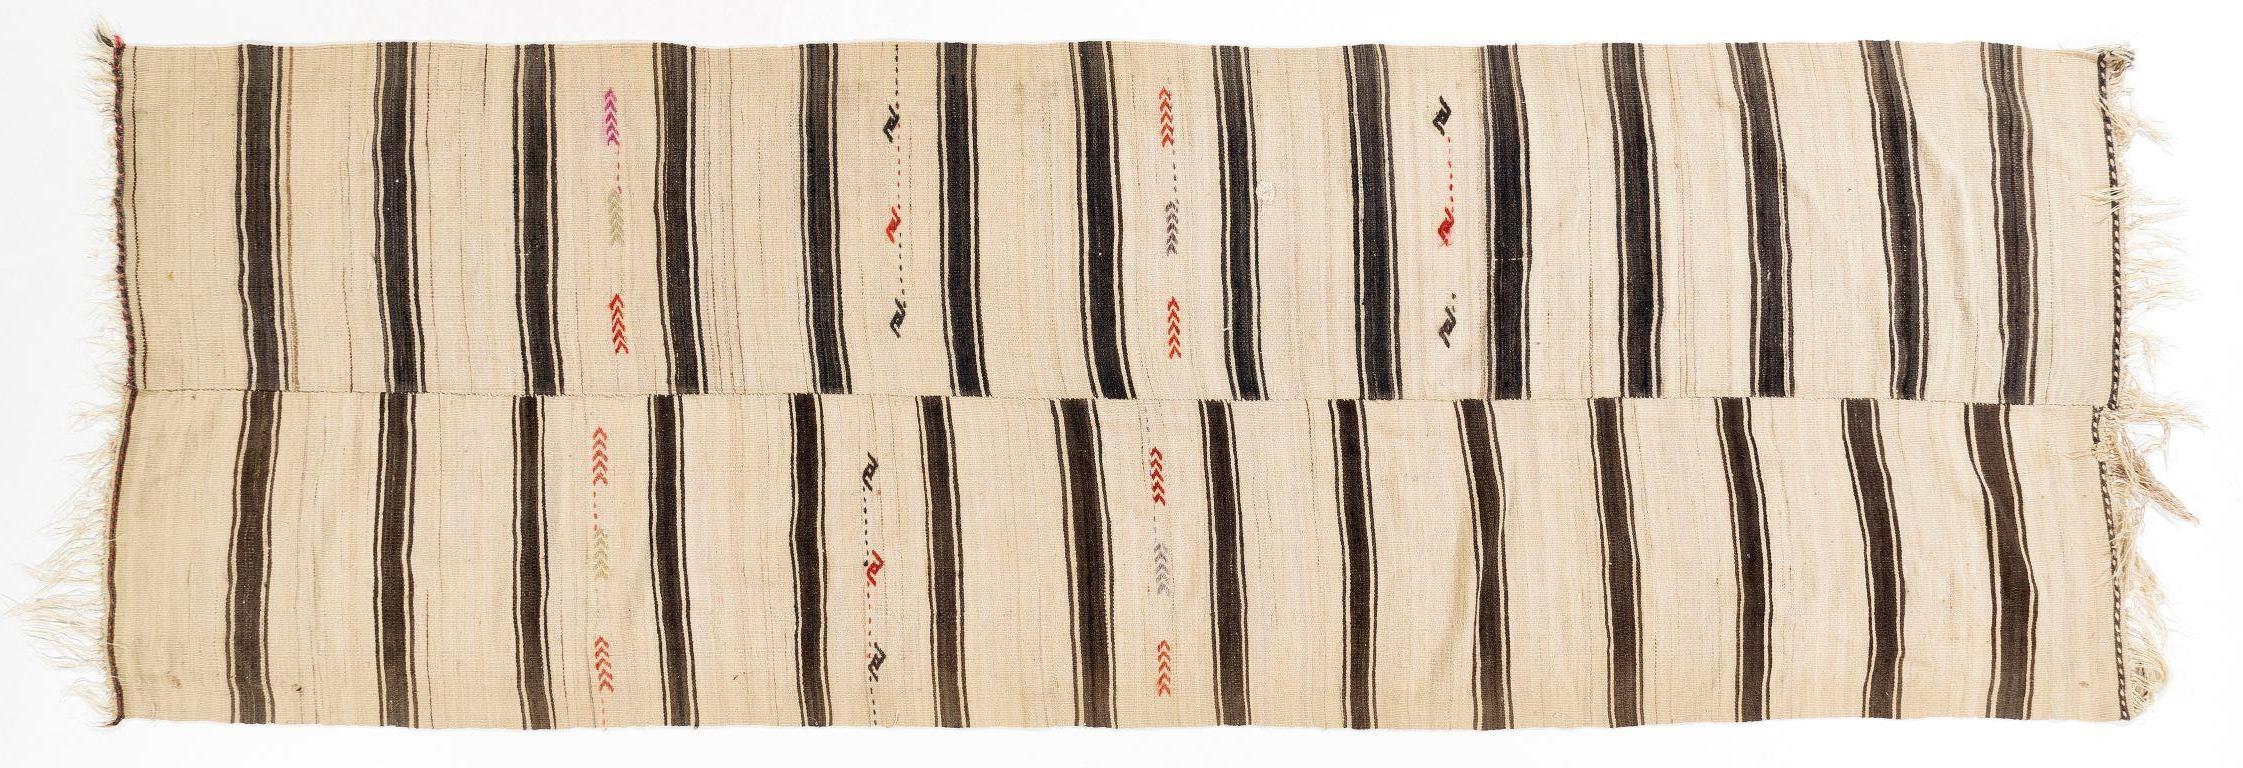 A beautiful and simple flat-woven runner from the 1960s is made of natural hand-spun wool in shades of brown and cream. It features a banded design with hook and fishbone motifs in places. It is in good condition with no issues, professionally